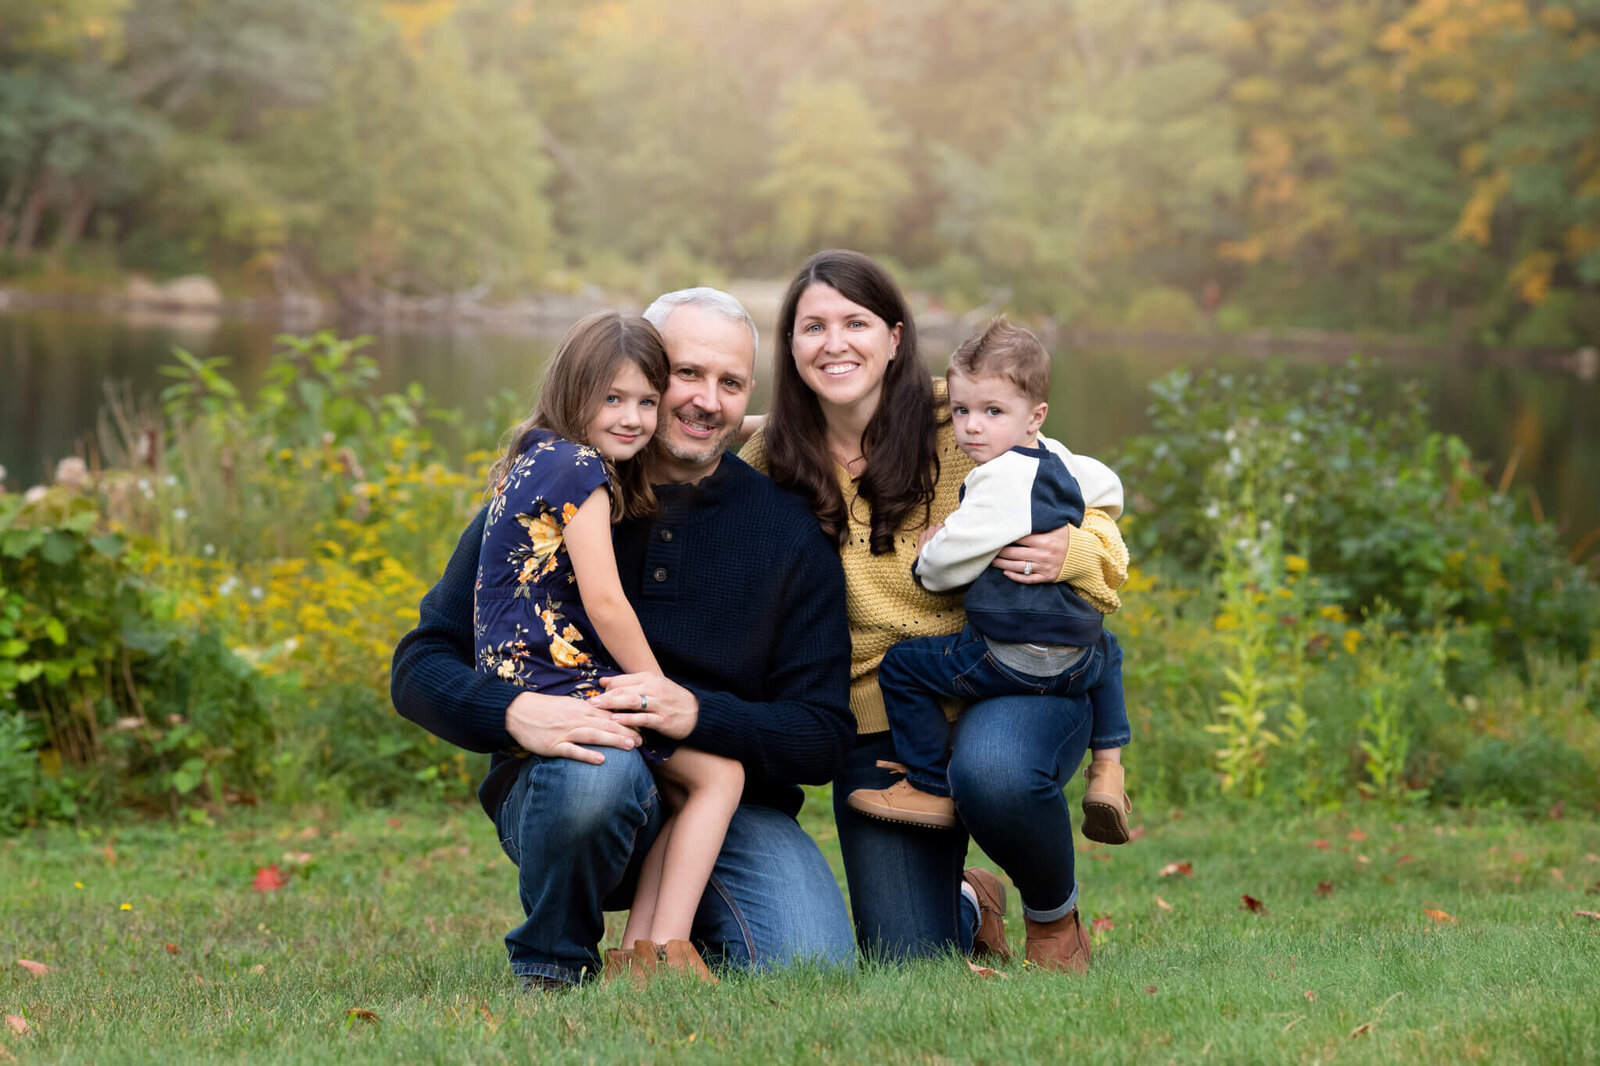 Family photo of a mother, father, and two children in fall